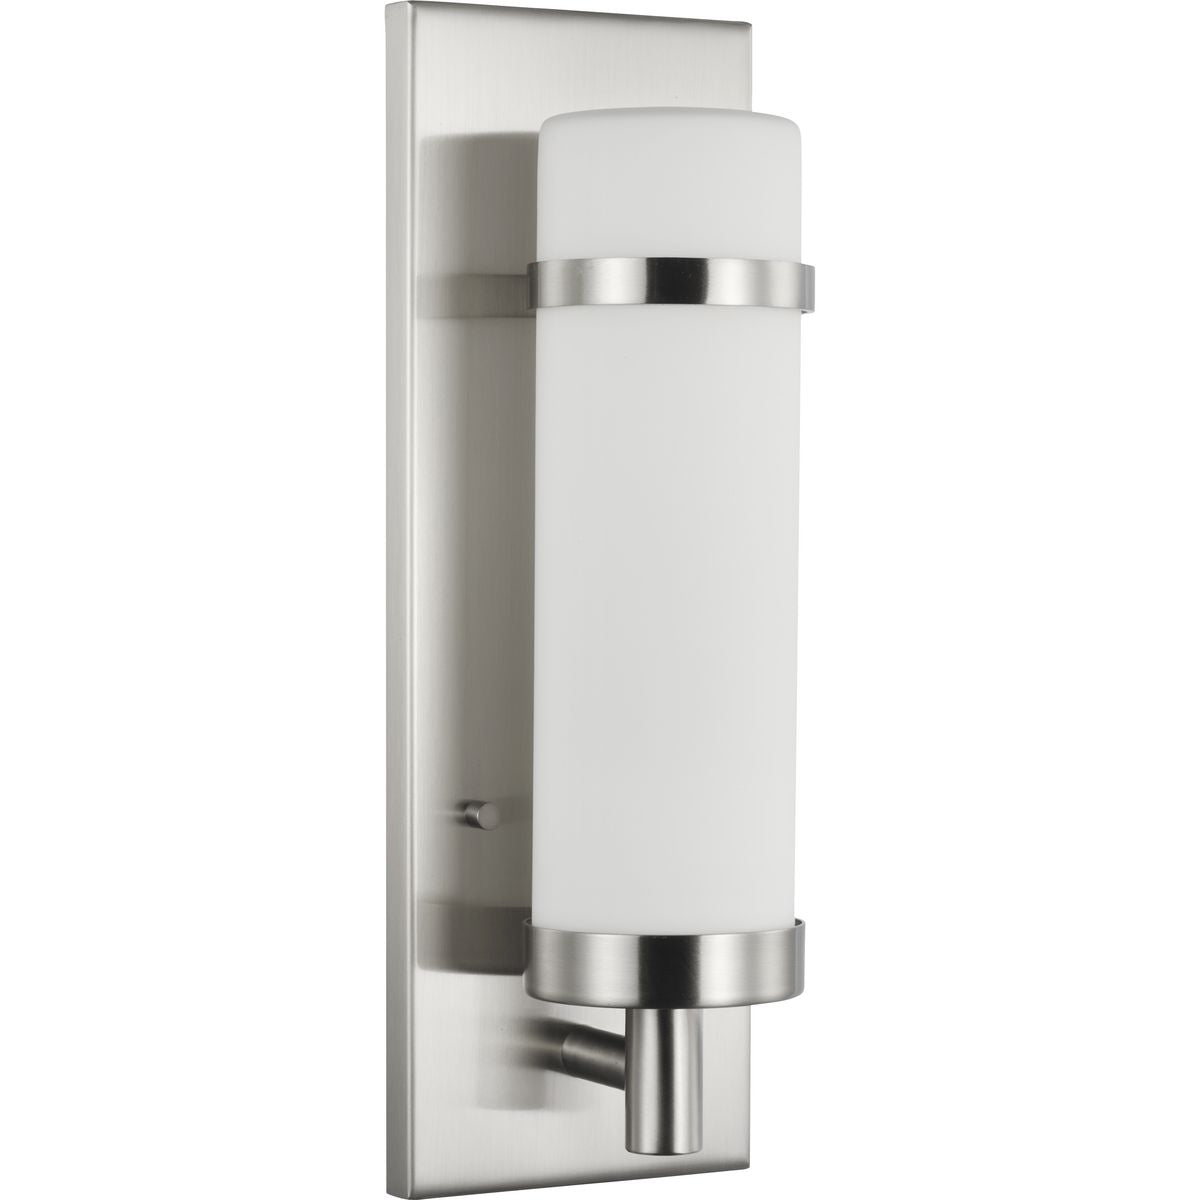 PROGRESS LIGHTING P710087-009 Brushed Nickel Hartwick Collection Brushed Nickel One-Light Wall Sconce